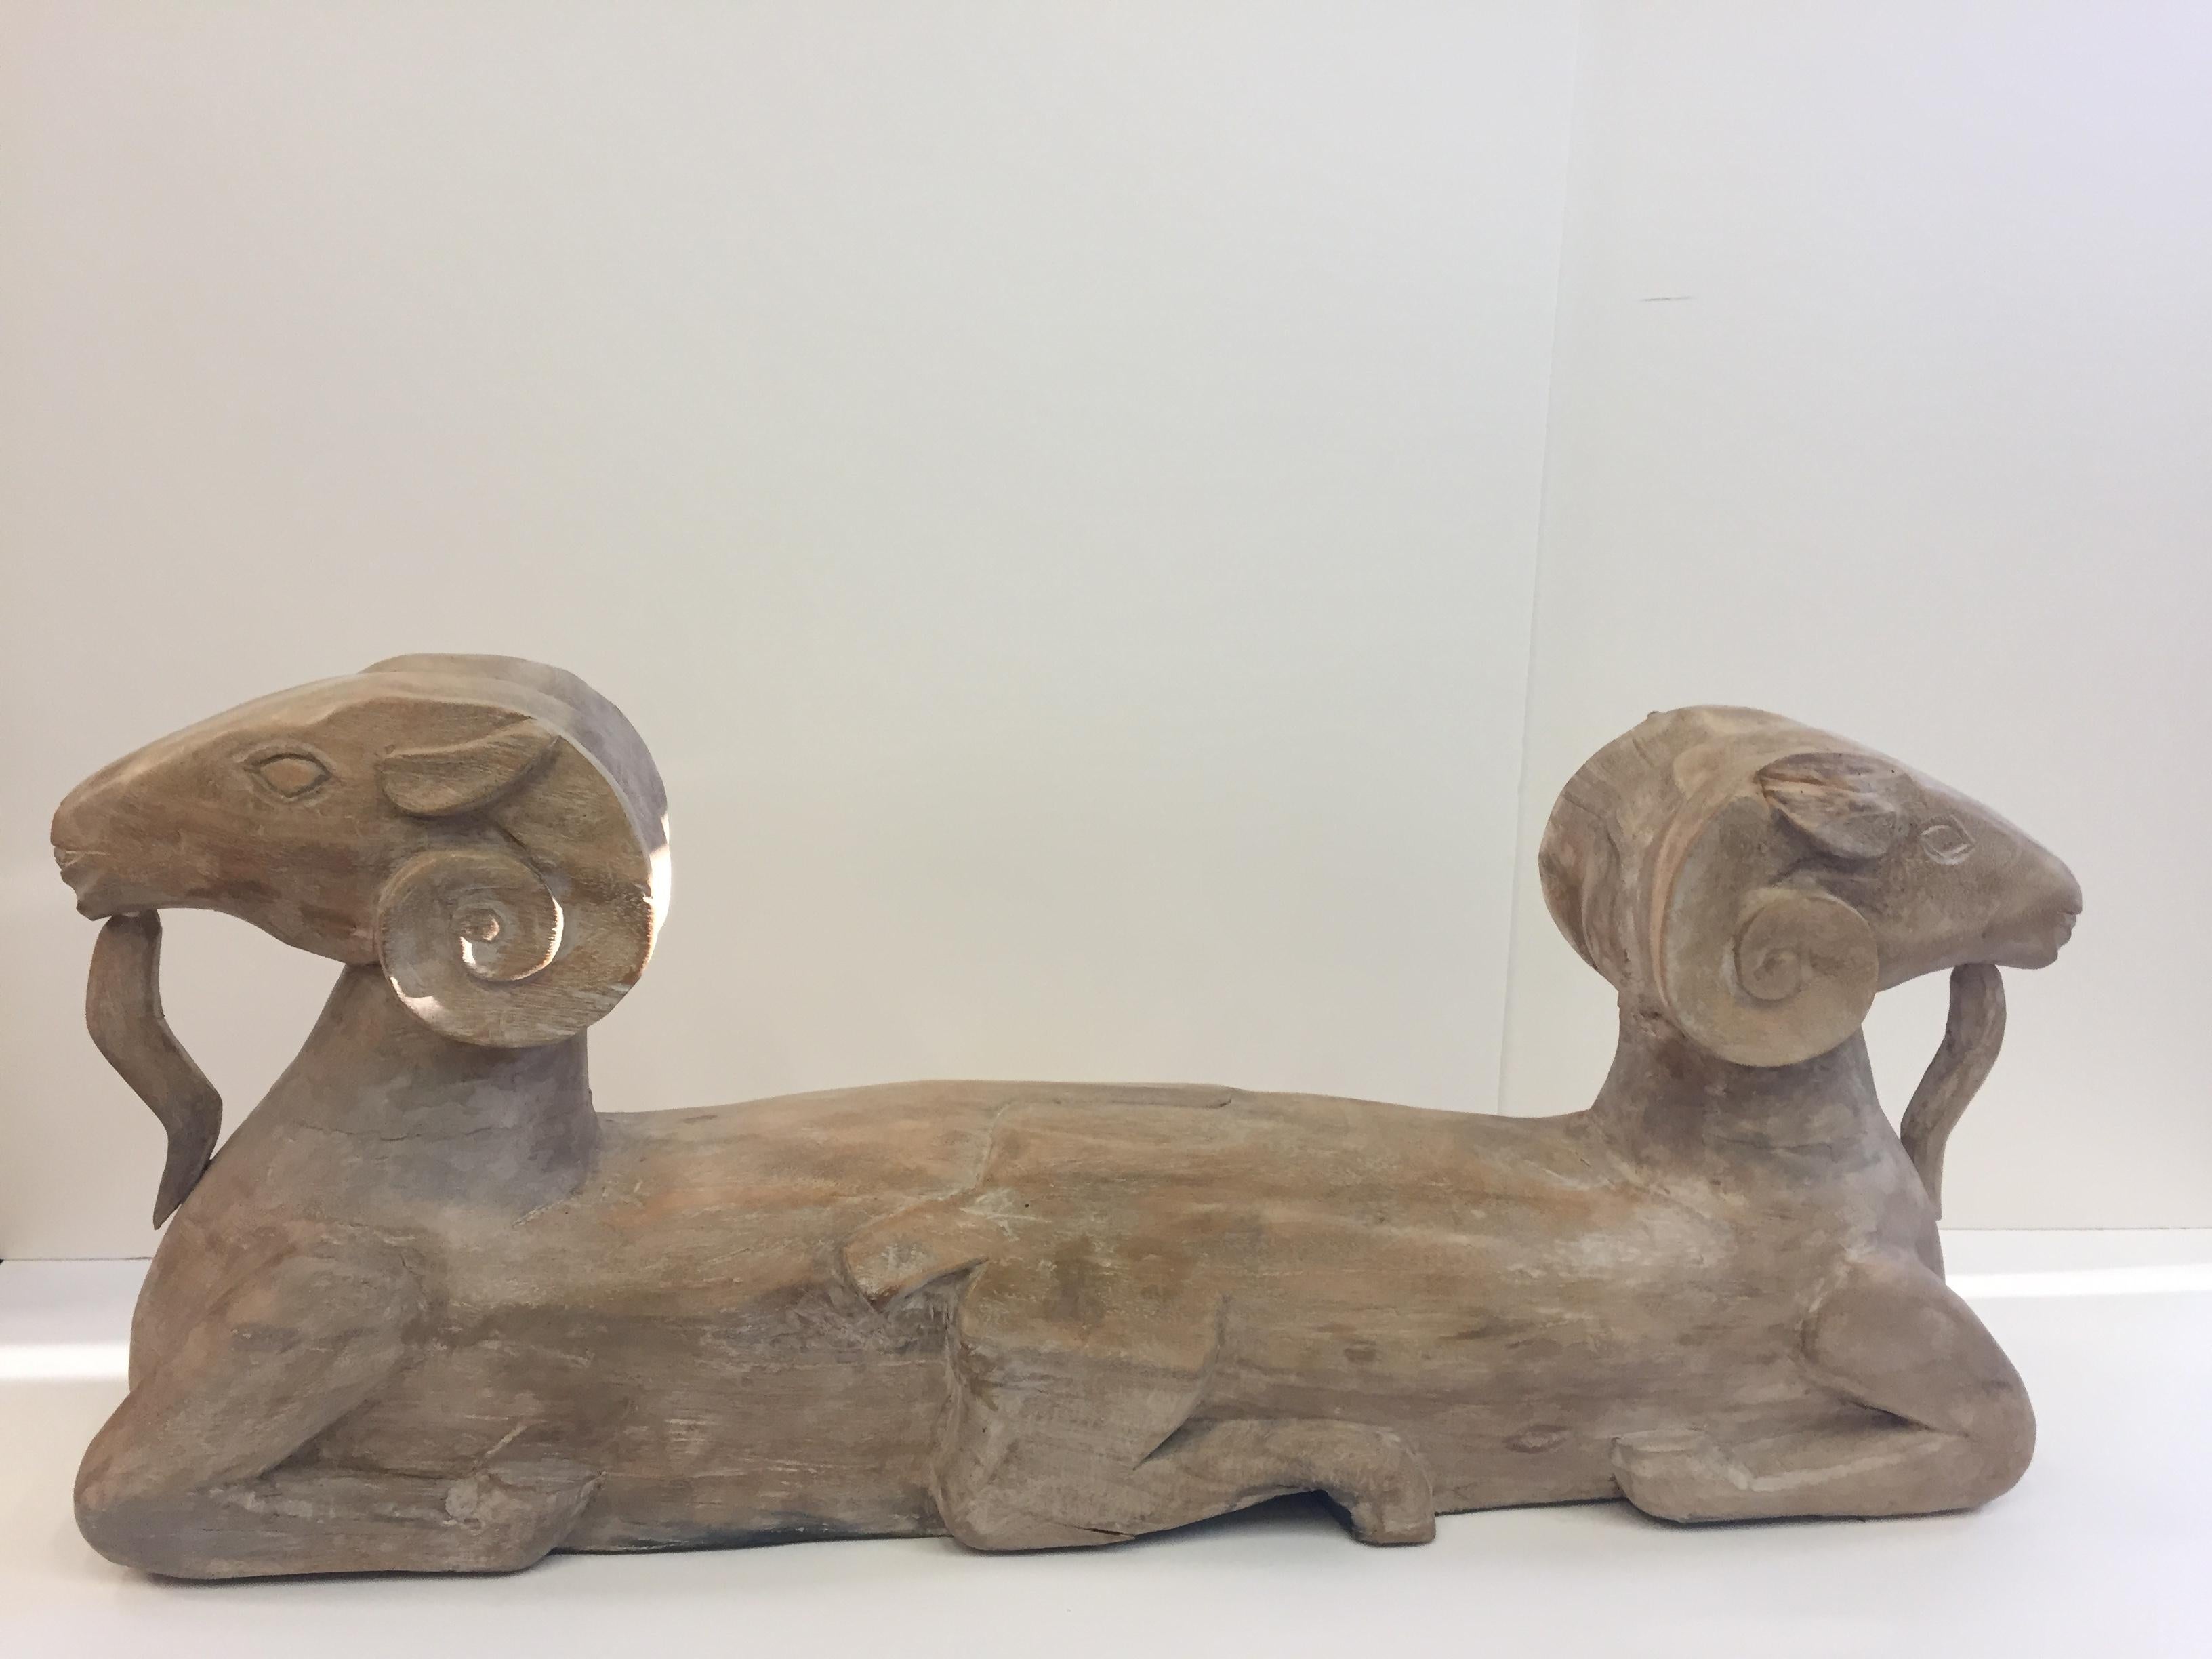 An impressive natural wood sculpture, elongated linear shape with Egyptian rams heads at either end. Great on a console.